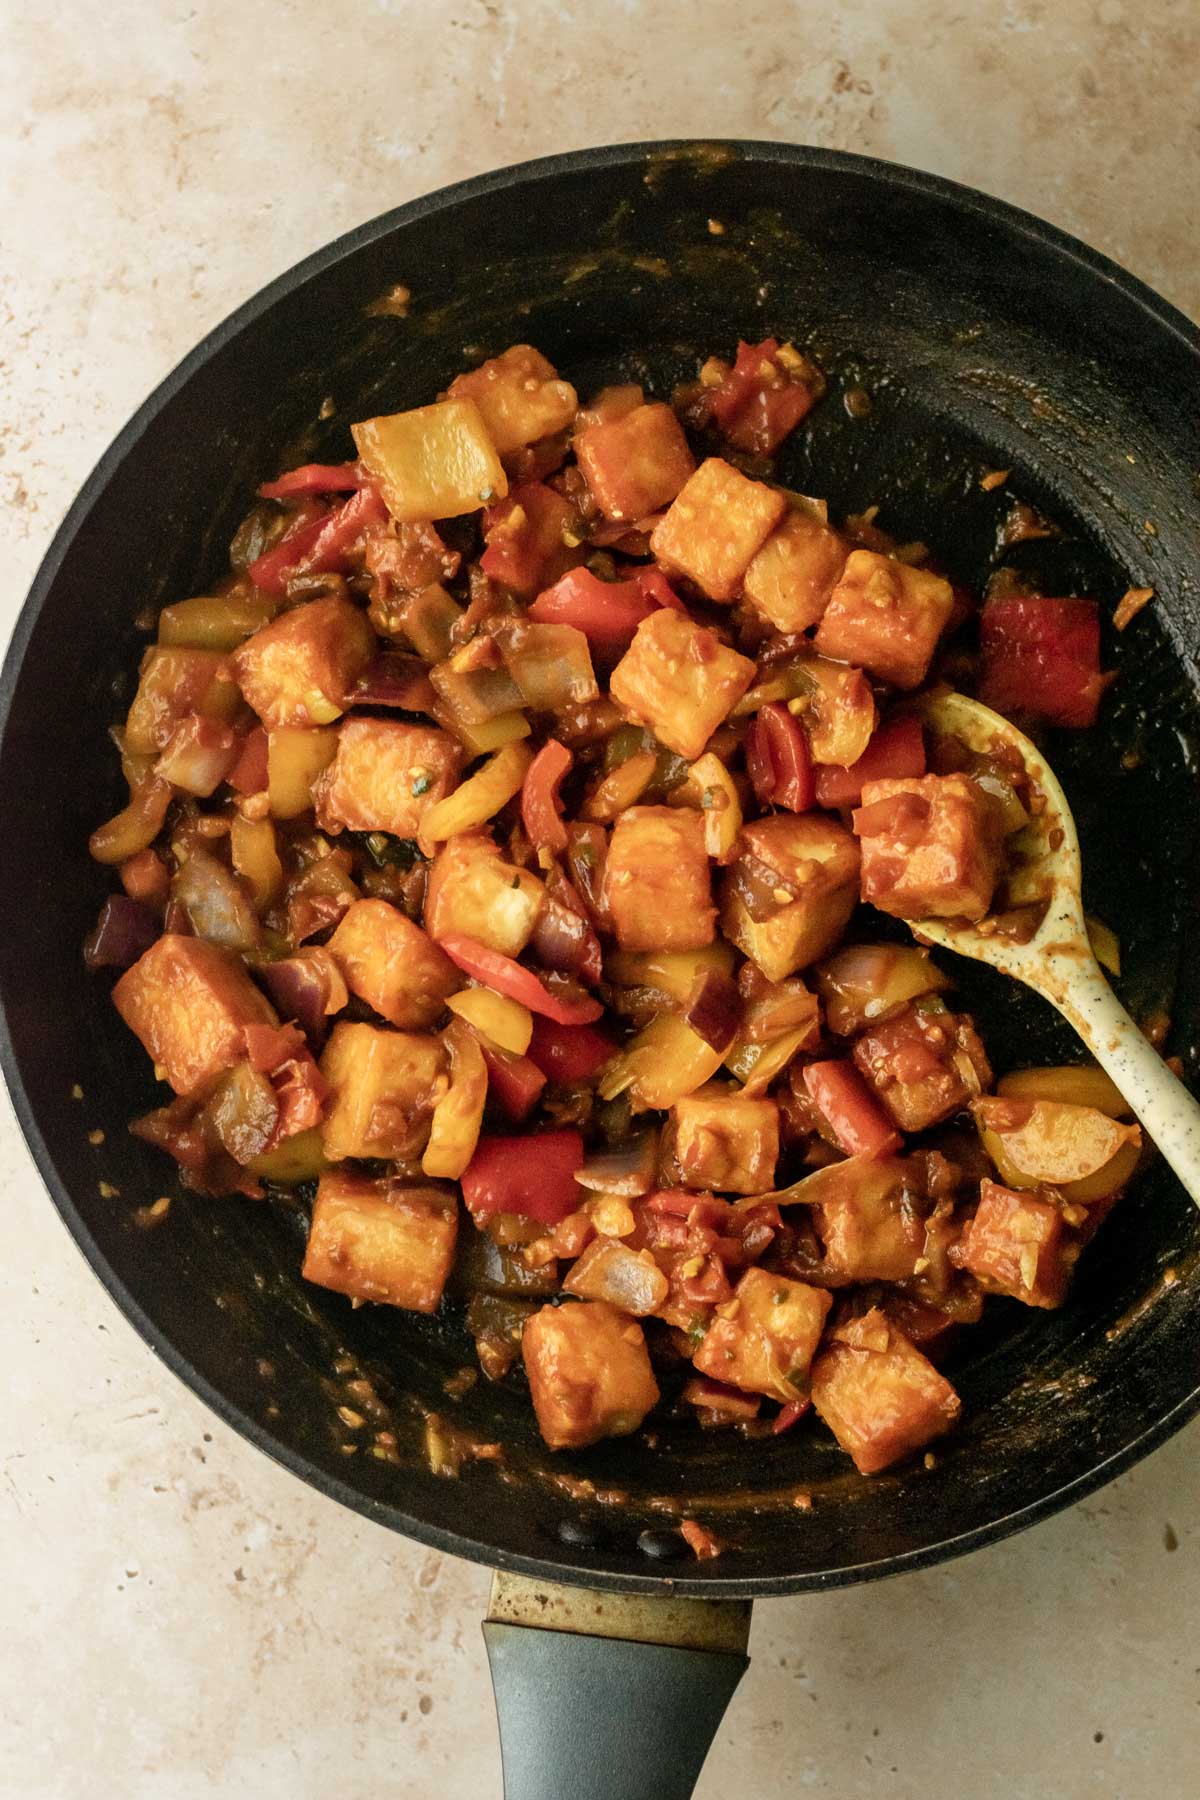 prepared chilli paneer in a frying pan ready to be enjoyed